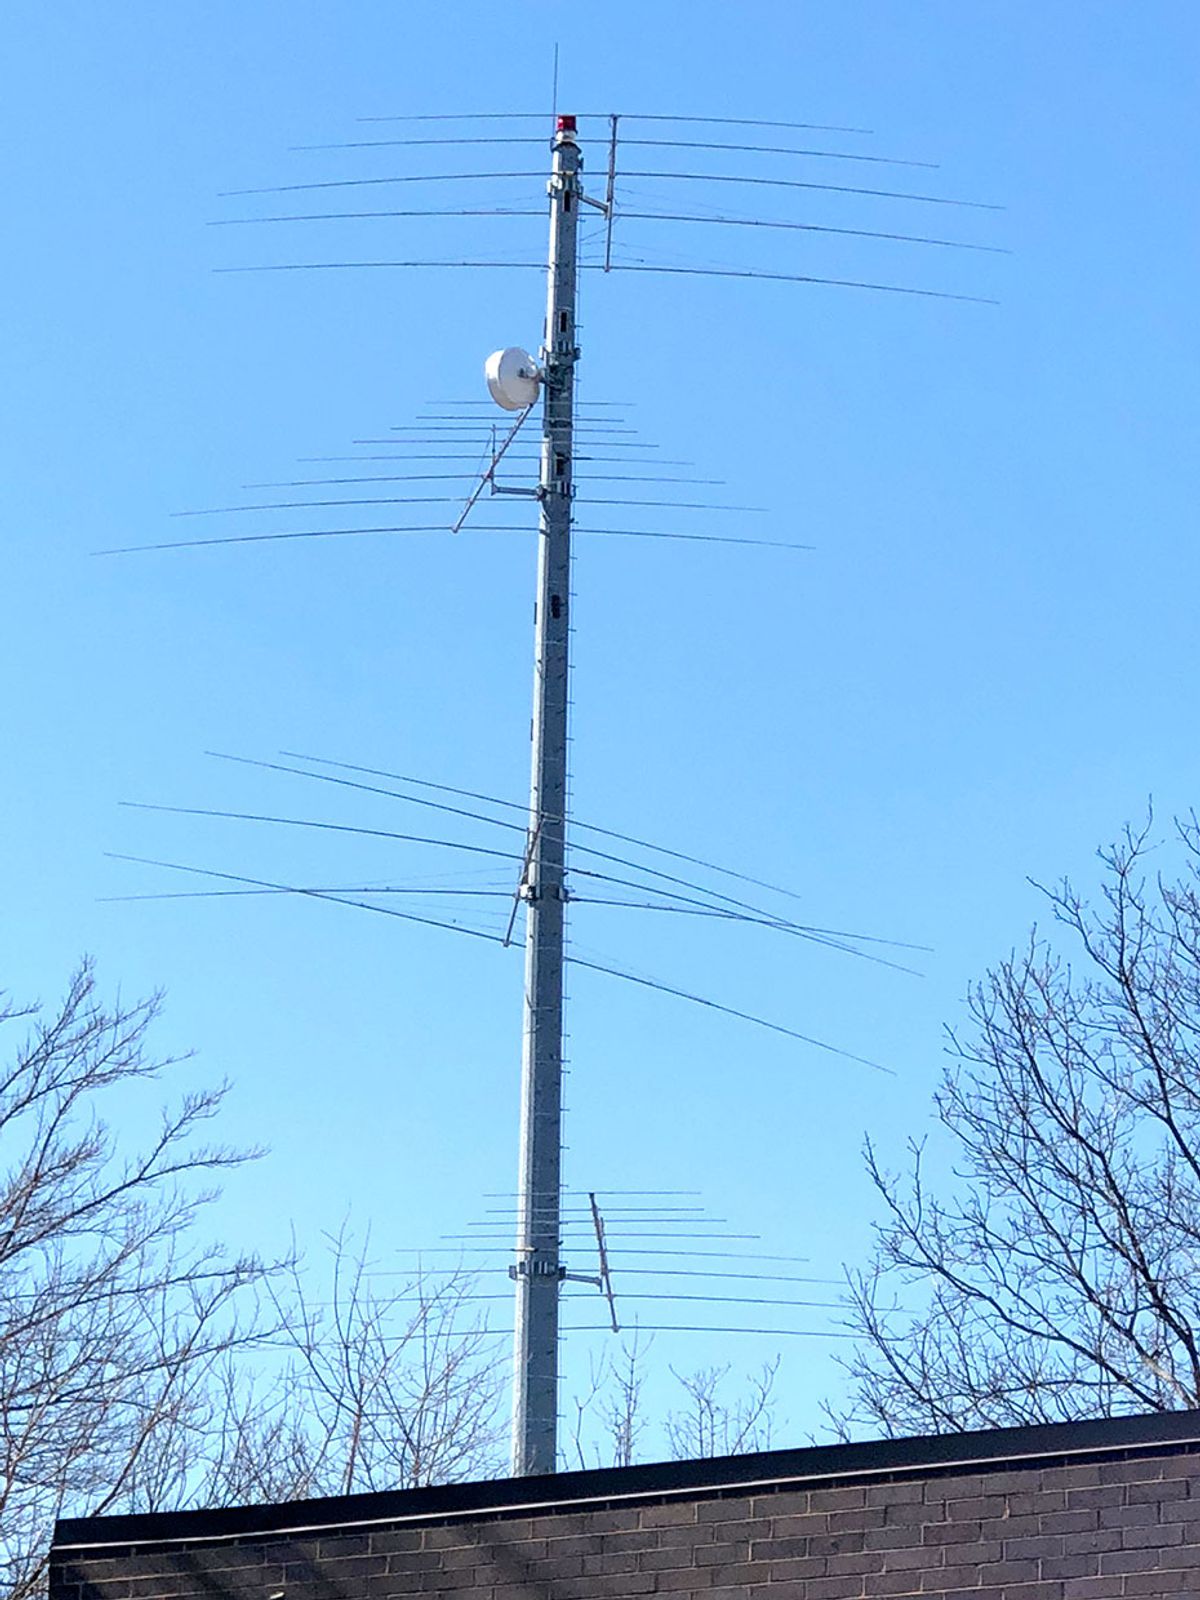 A photo of a cell tower with multiple levels of antennas sticking out of it.